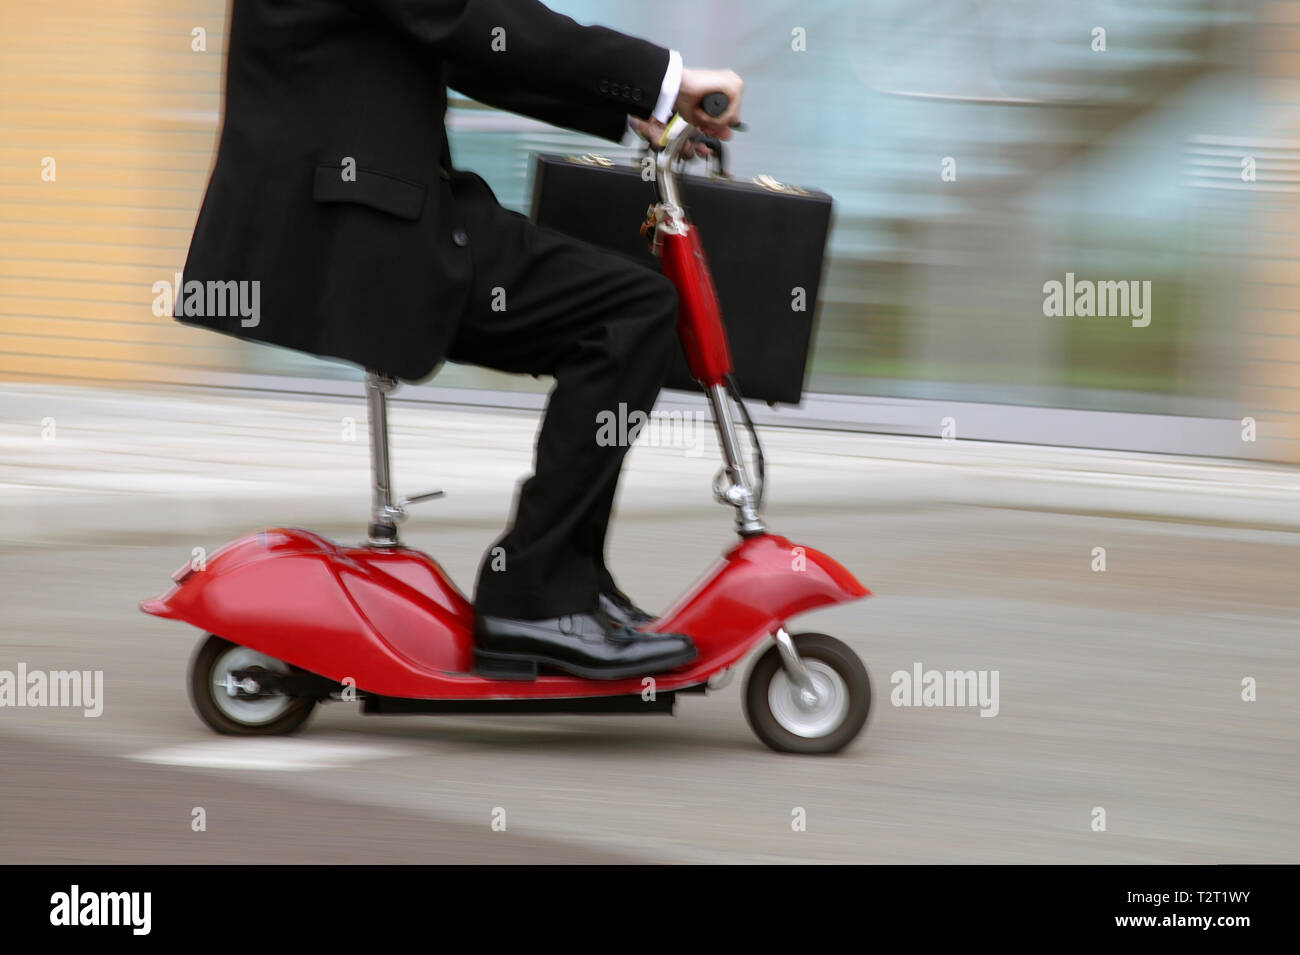 Low angle view of a commuter on Motorised Scooter Stock Photo - Alamy